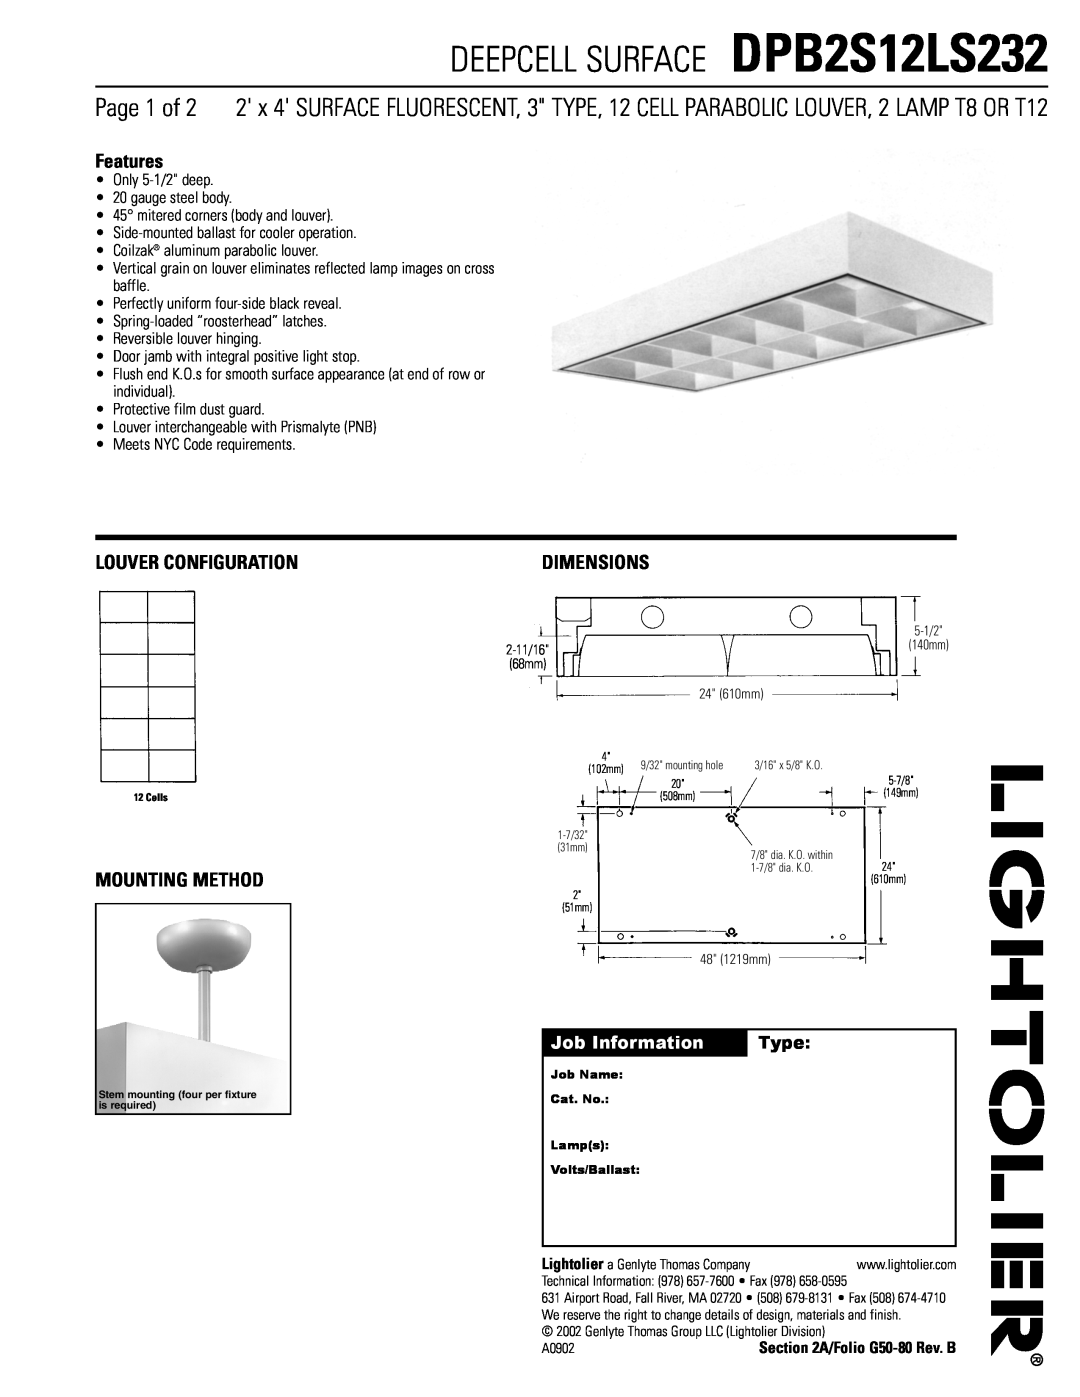 Lightolier dimensions DEEPCELL SURFACE DPB2S12LS232, Features, Louver Configuration, Mounting Method, Dimensions, Type 